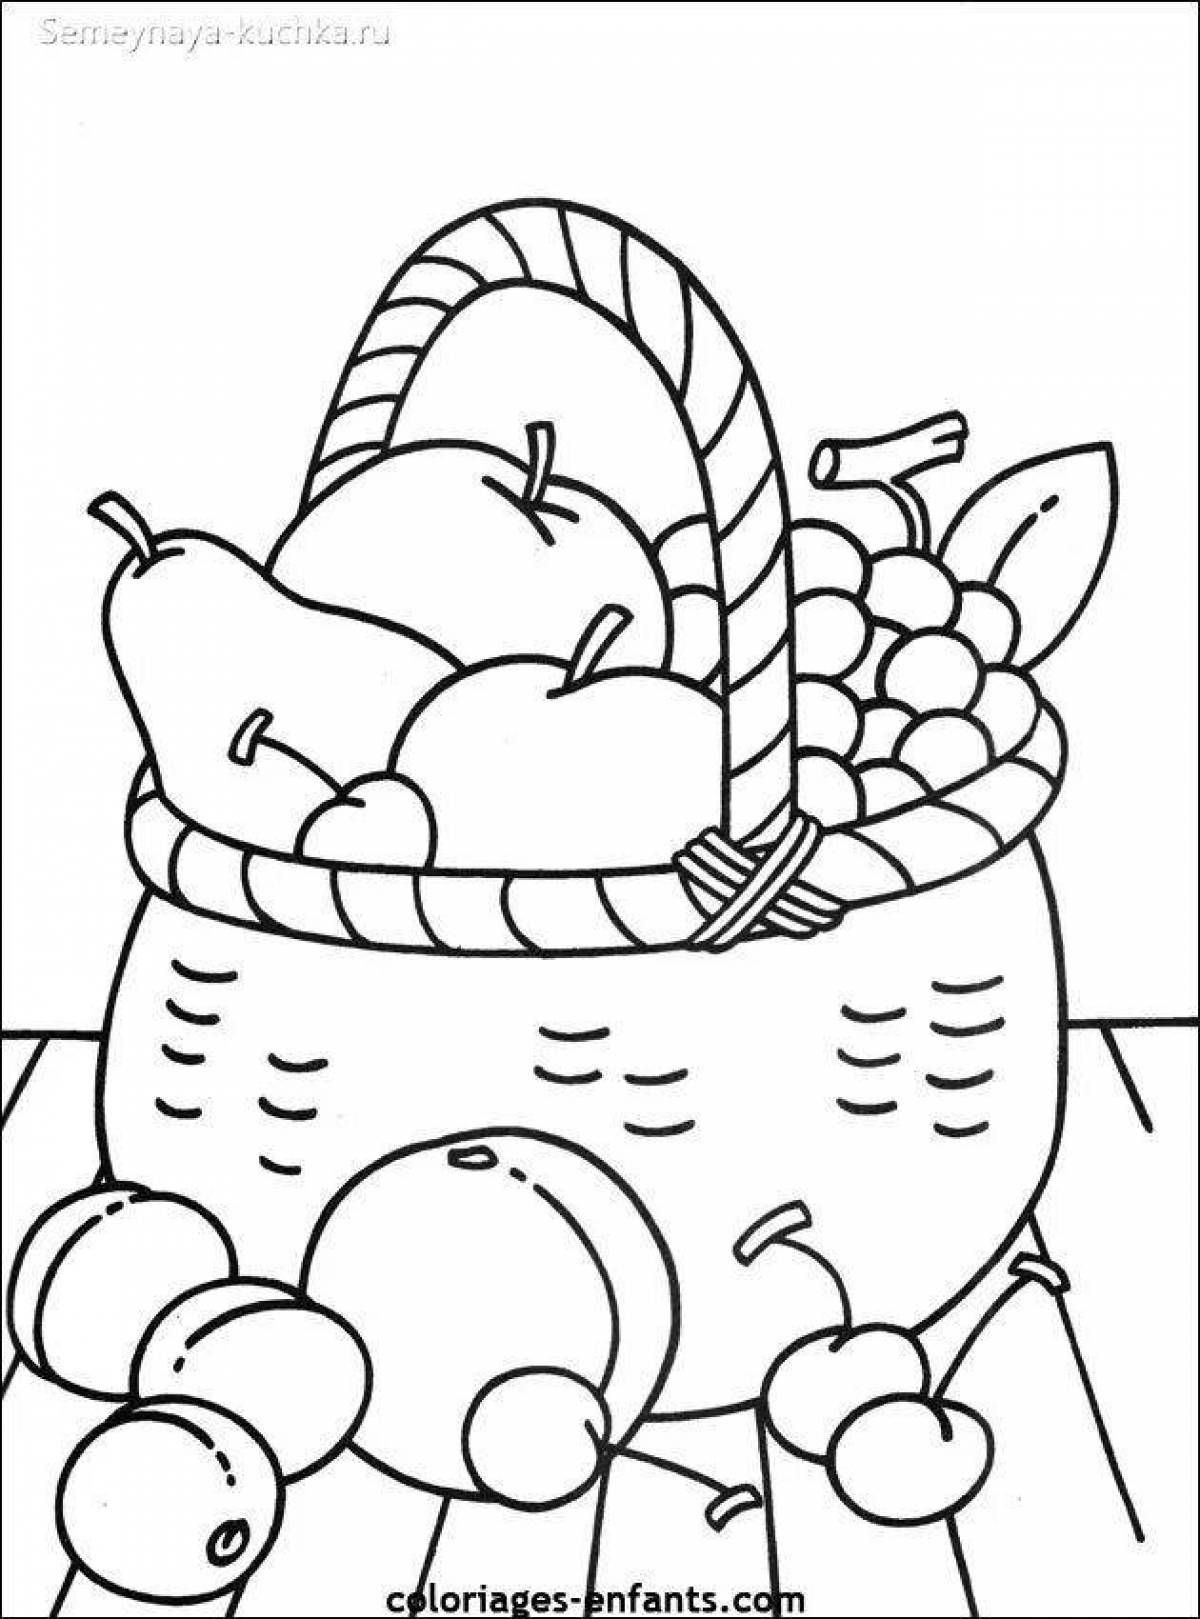 Amazing colorful fruit basket coloring book